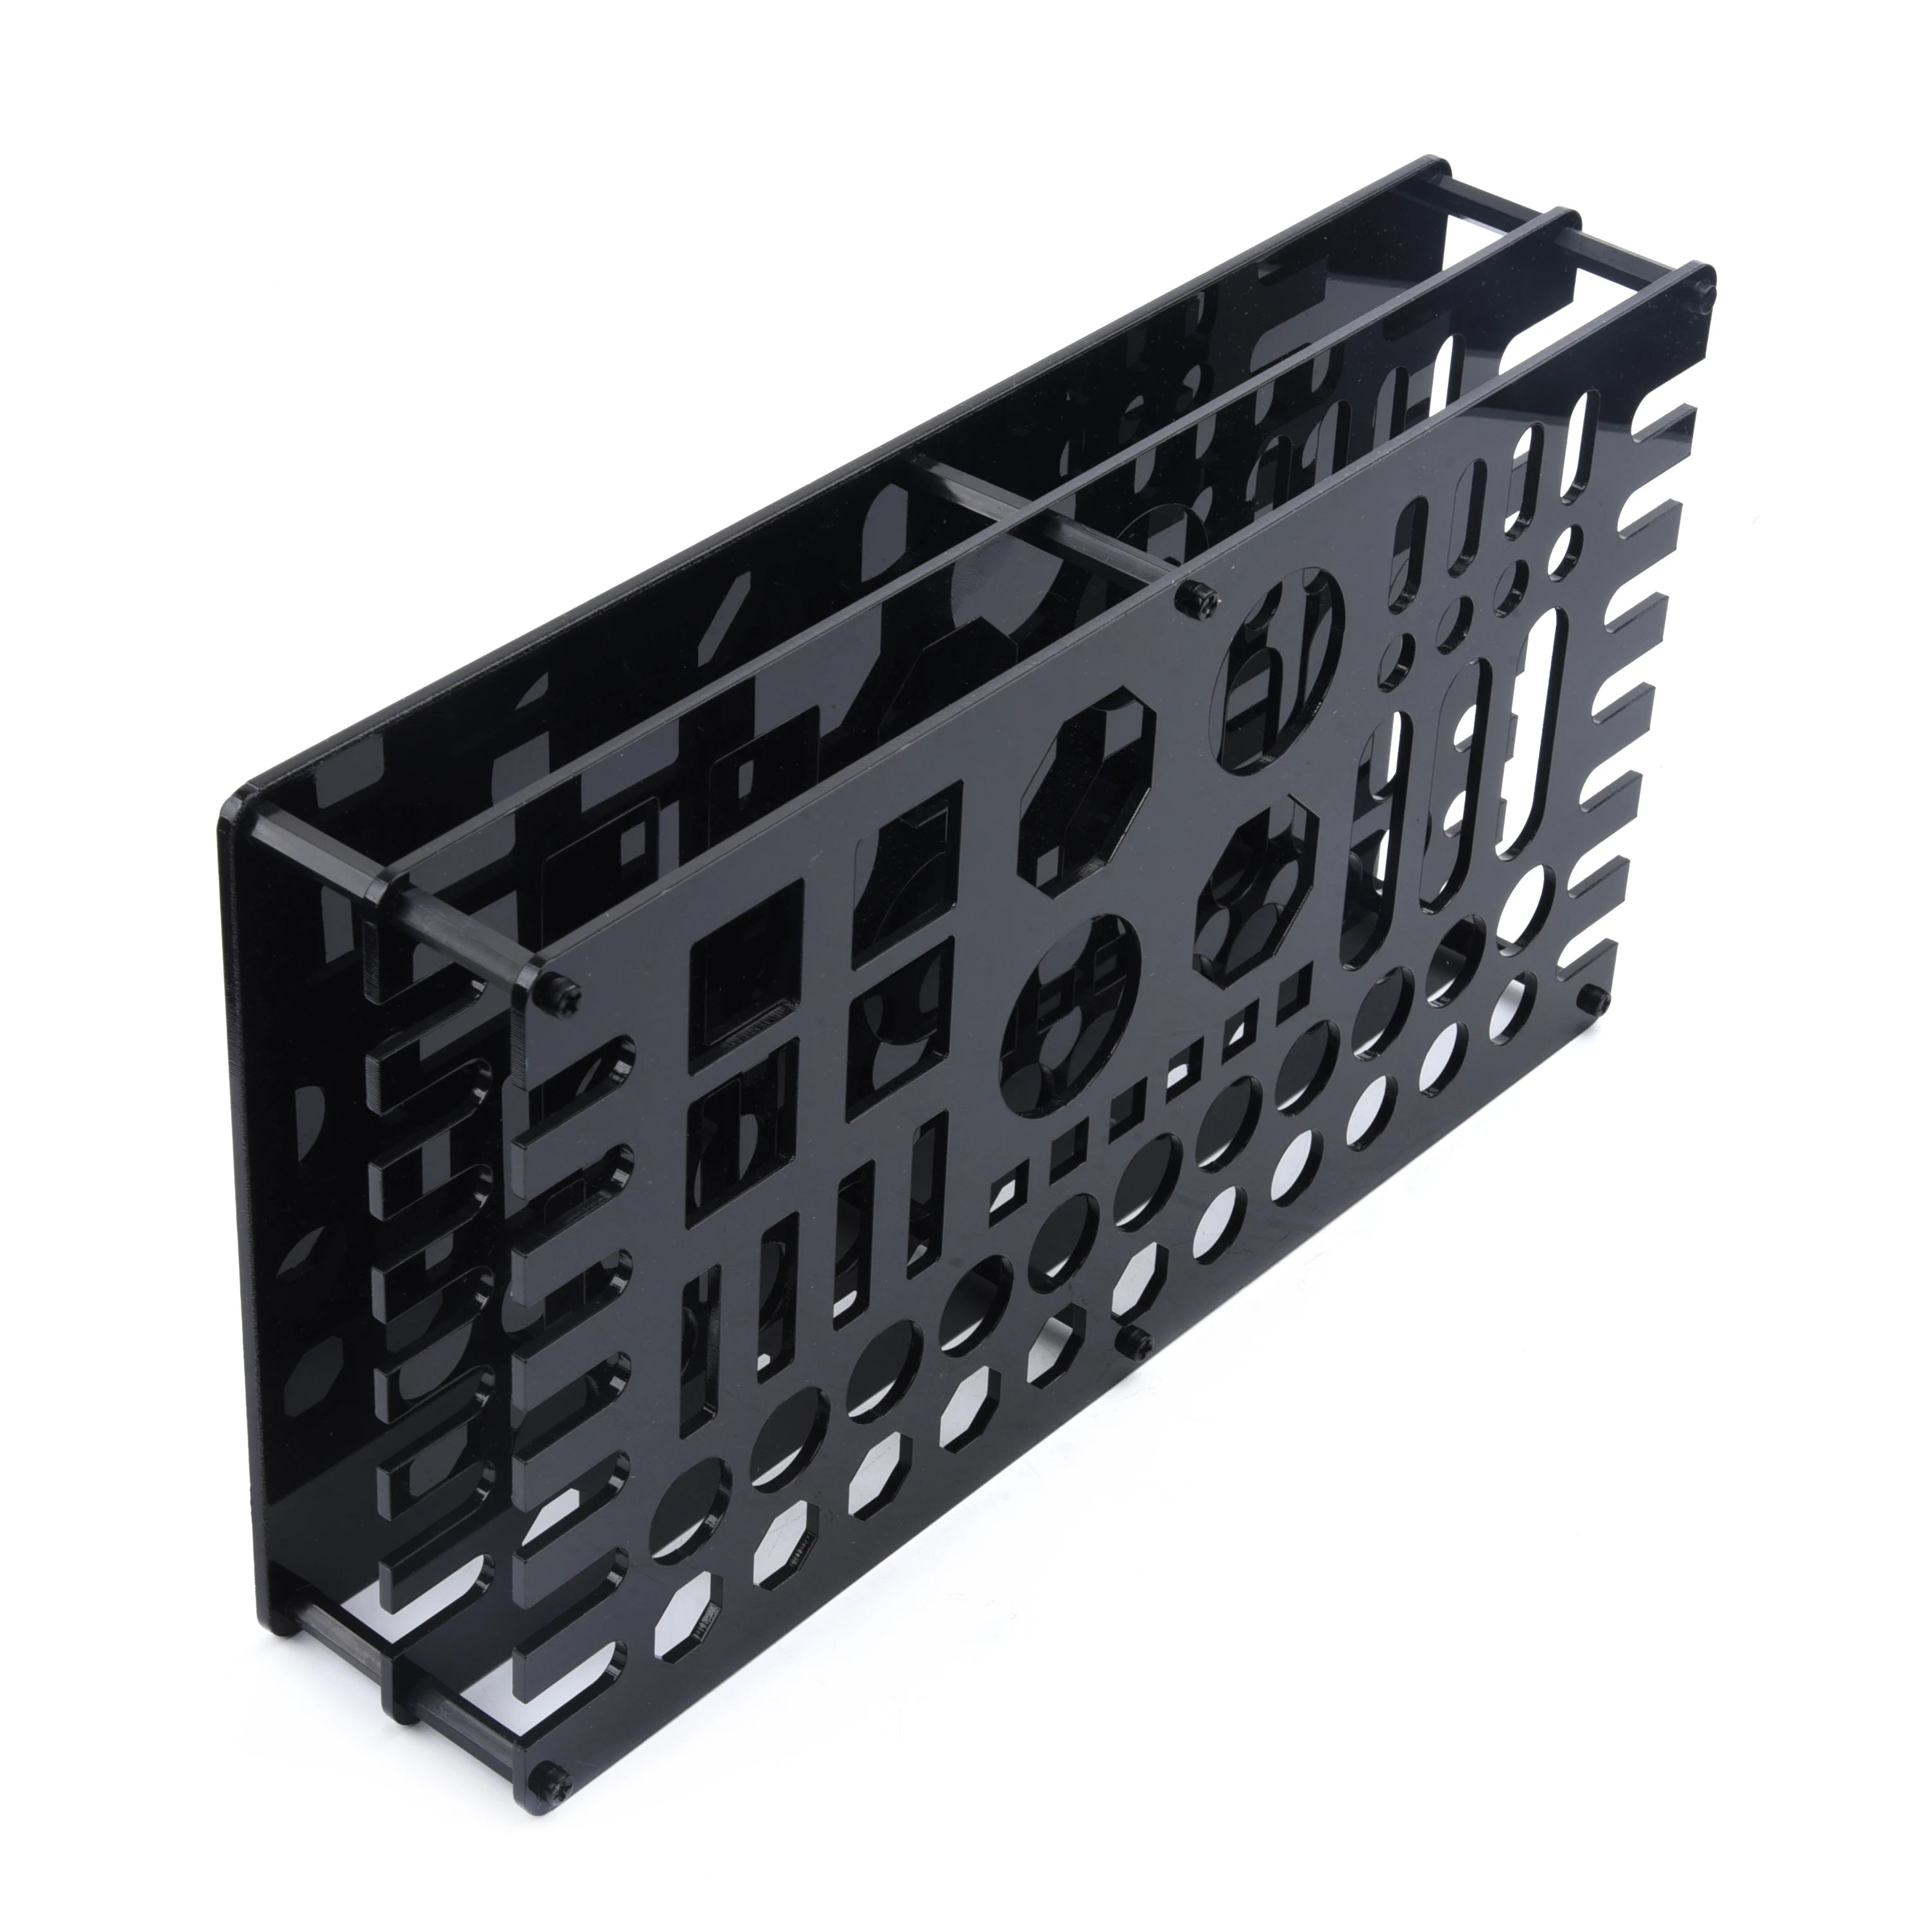 63 Hole Screwdriver Storage Rack Holder, ONLY the Screwdriver Organizers, no included the screwdriver and pliers